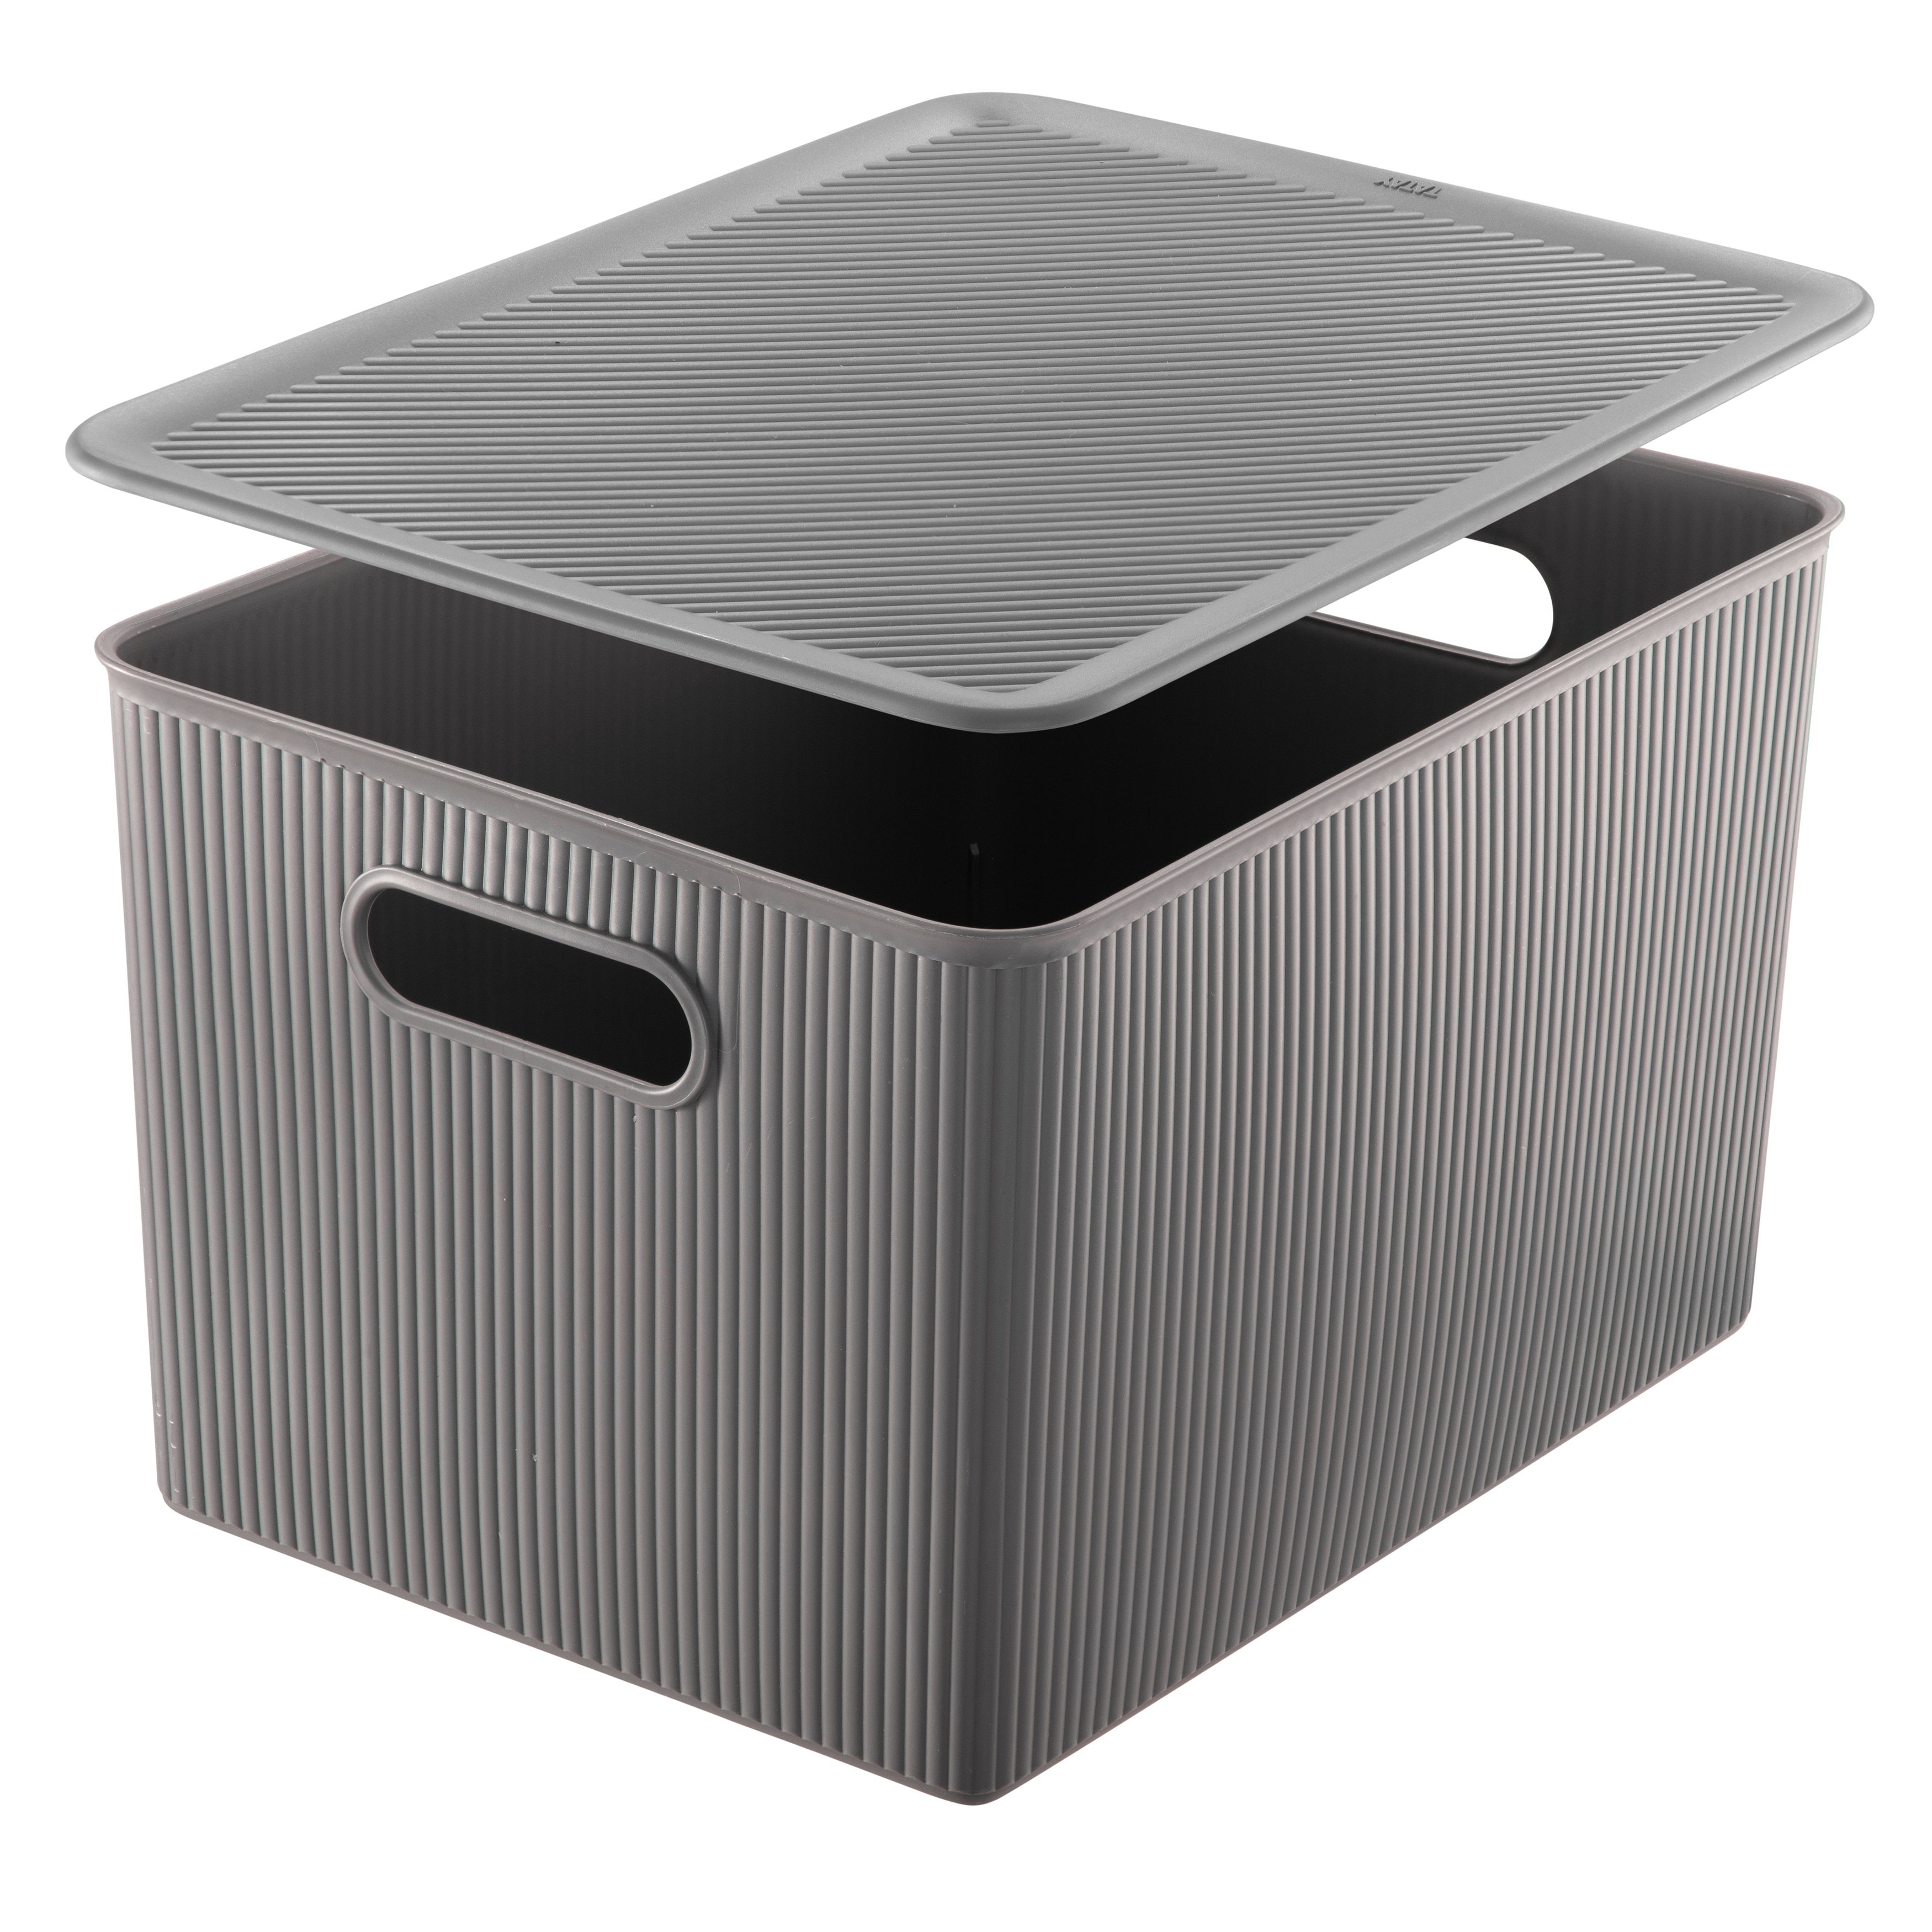 https://ak1.ostkcdn.com/images/products/is/images/direct/1466155b243609a0cad09980ba8104c851bb5459/Superio-Ribbed-Storage-Bin-with-Matching-Lid.jpg